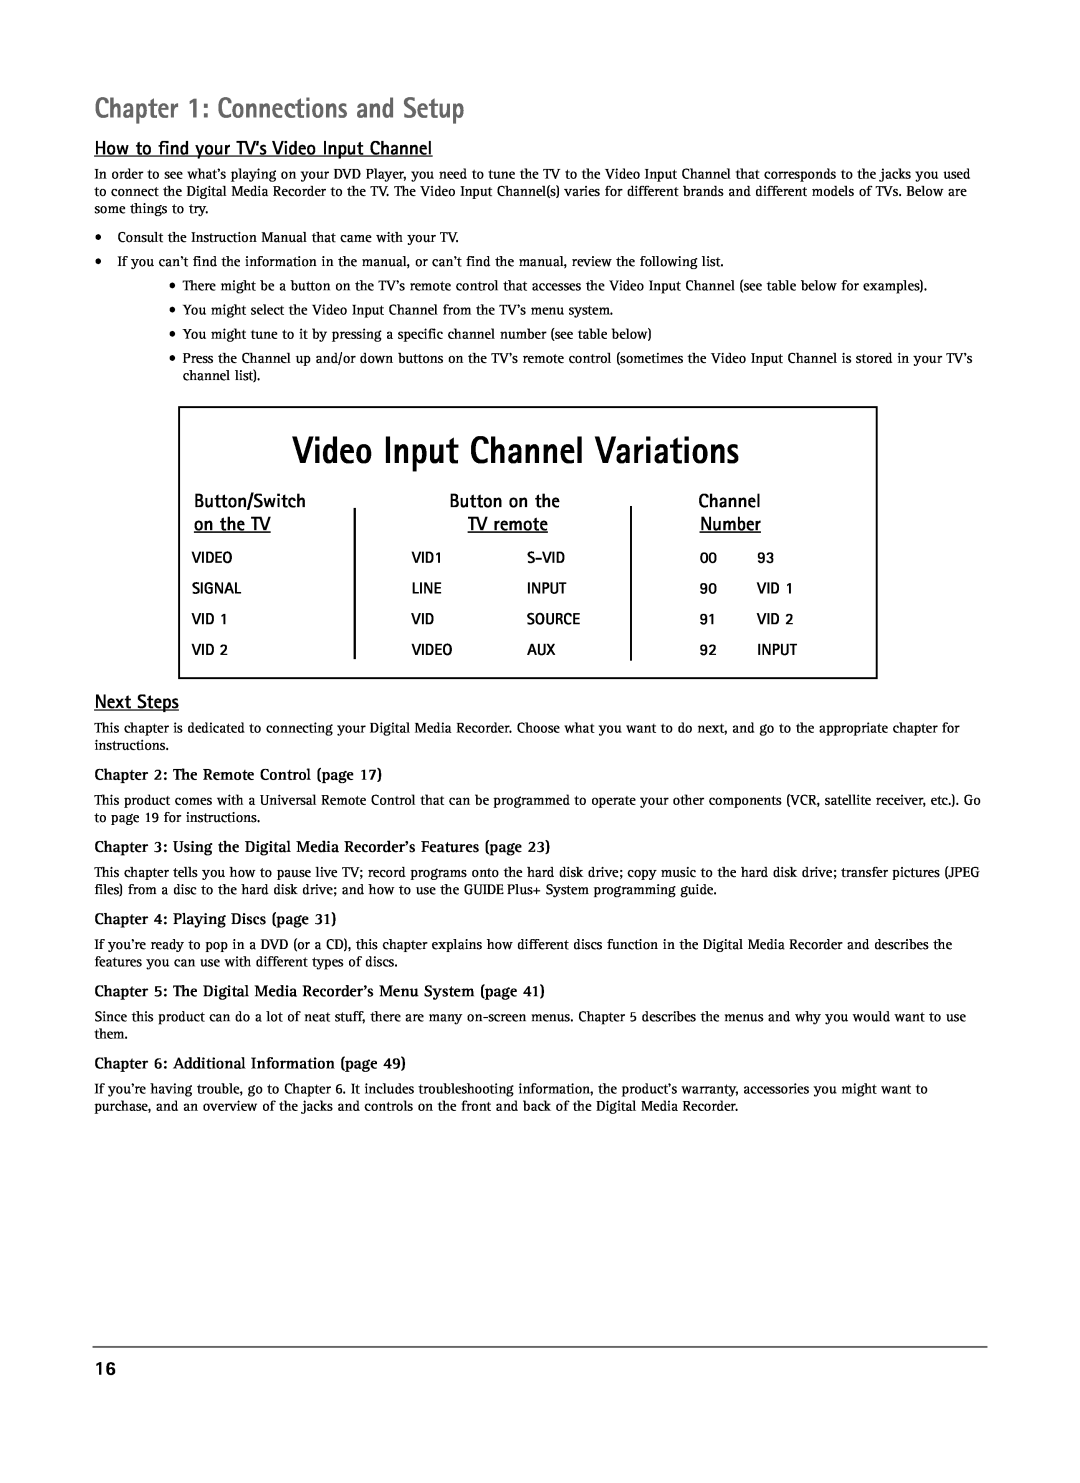 RCA DRS7000N Video Input Channel Variations, Connections and Setup, How to find your TV’s Video Input Channel, Next Steps 